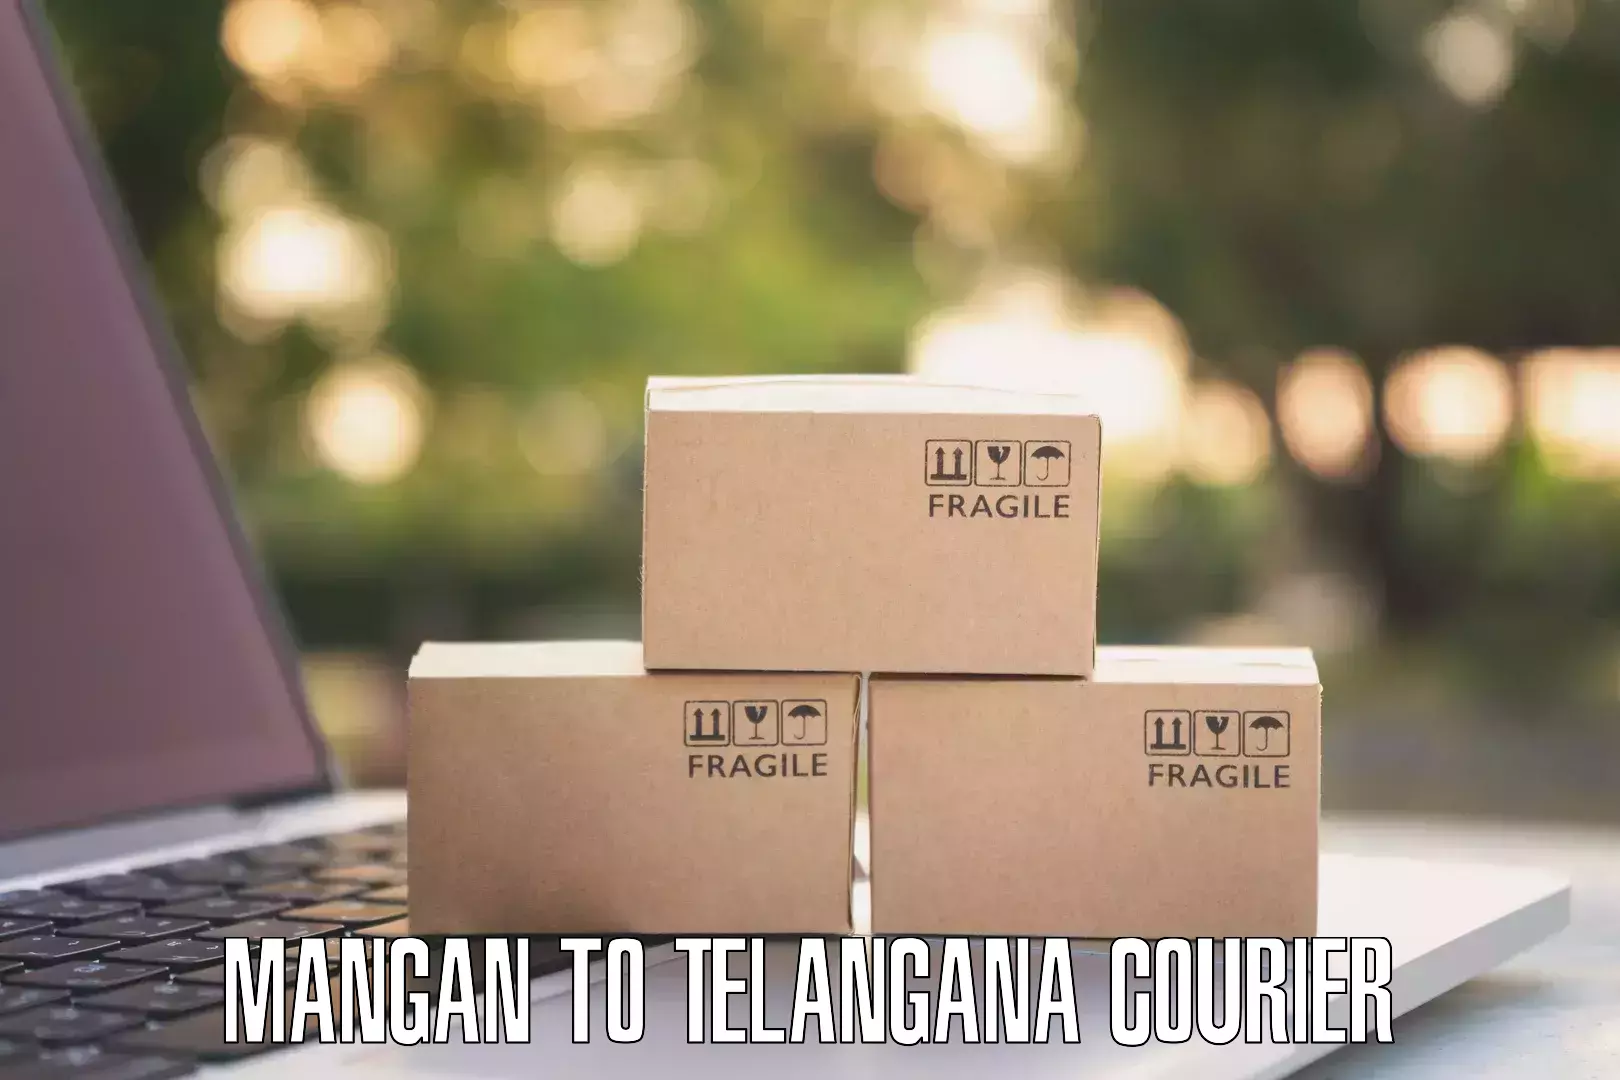 Bulk courier orders Mangan to Hyderabad